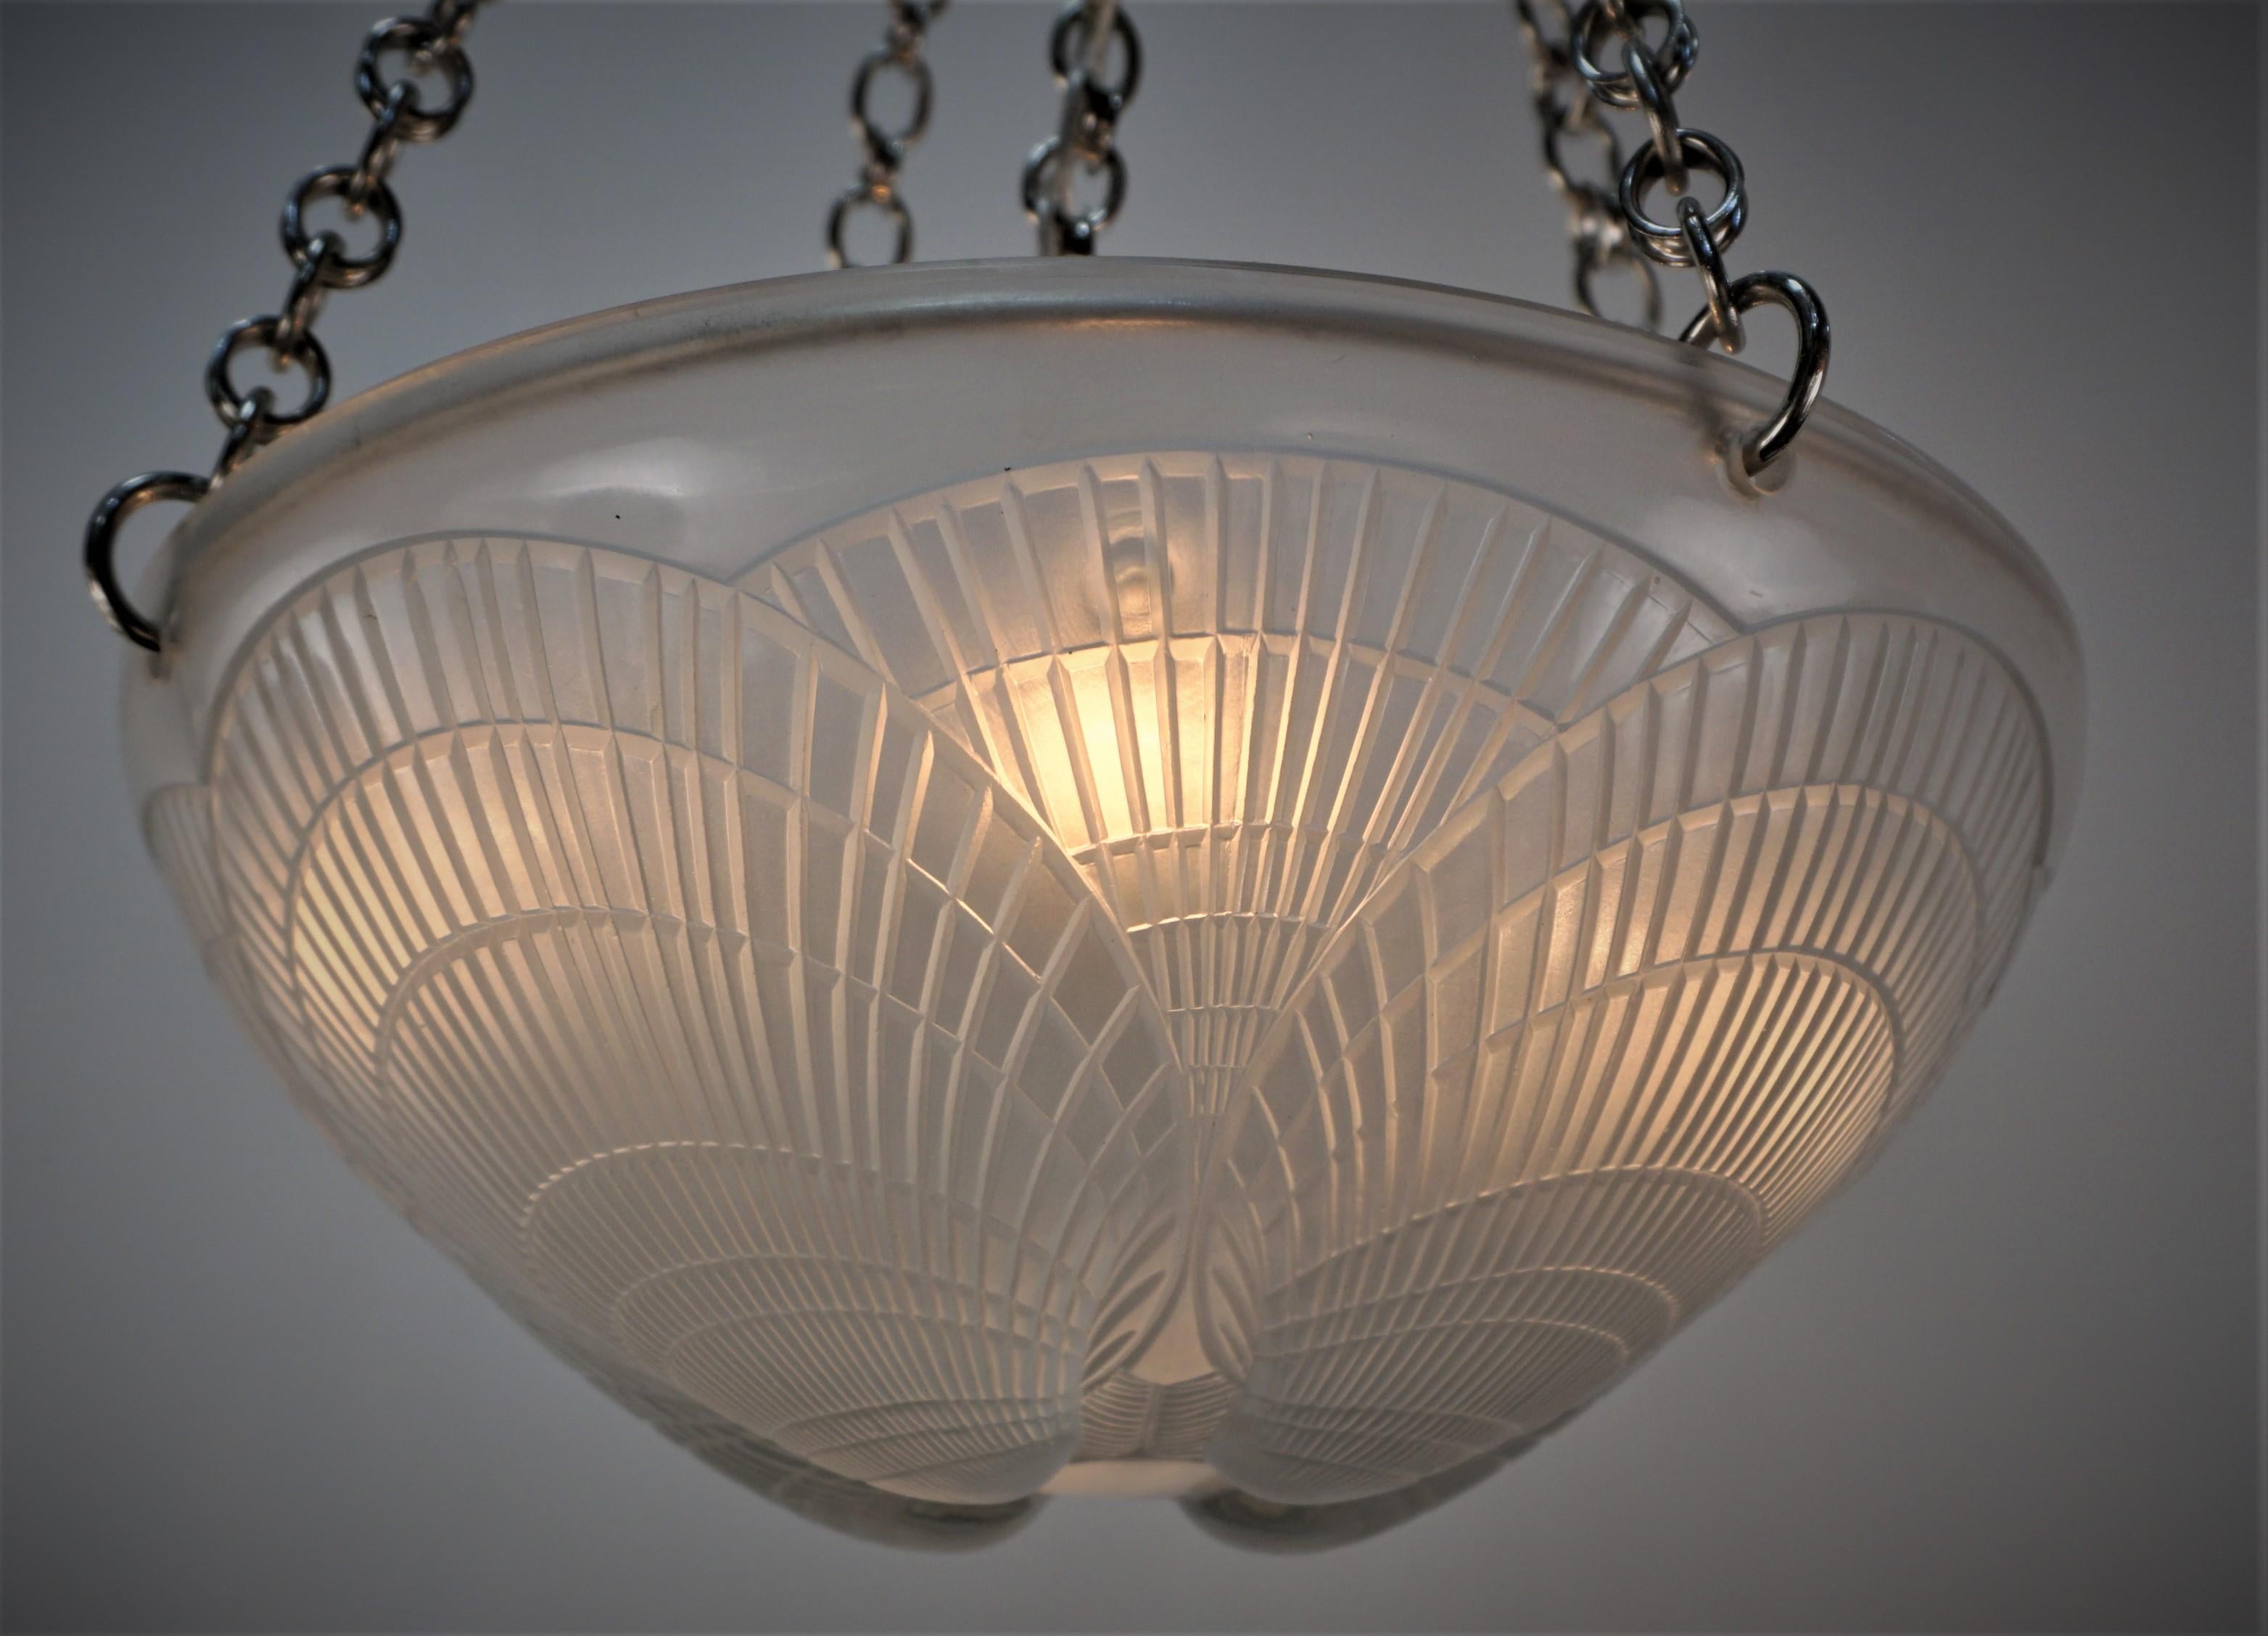 Rene Lalique seashell design Art Deco chandelier.
Four lights 60 watts each.
Professionally rewired and ready for installation.